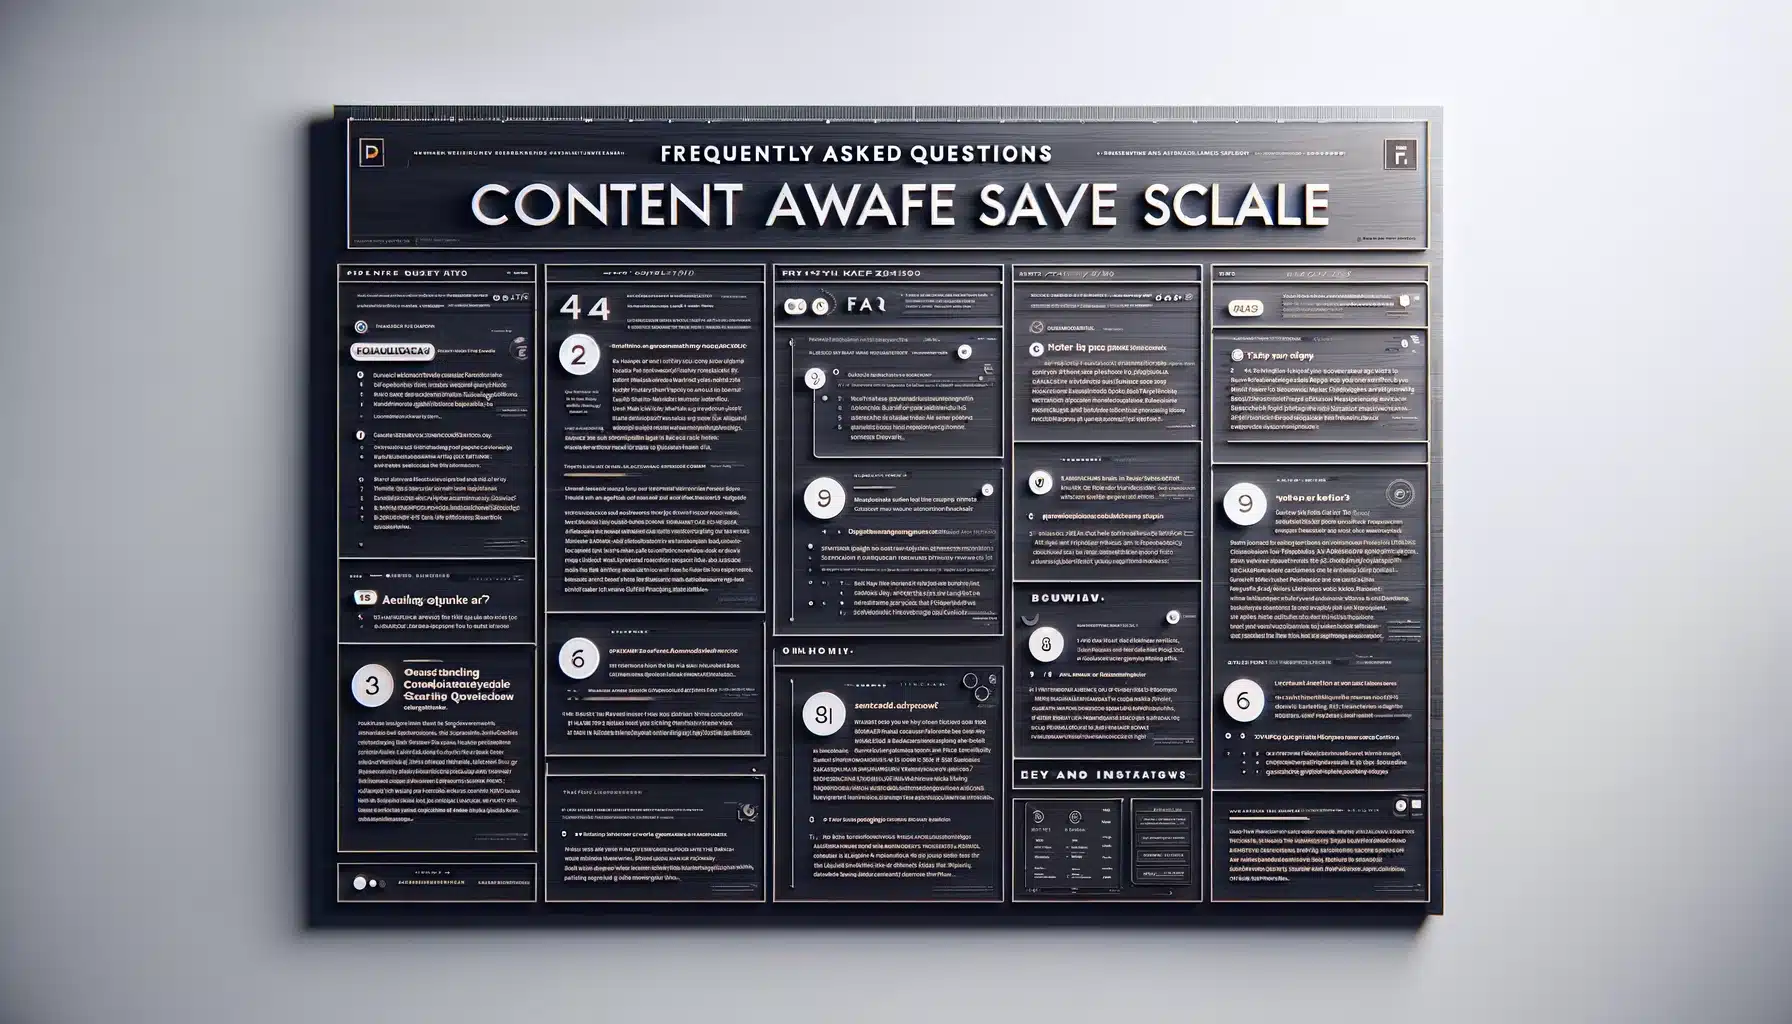 Sophisticated FAQ information board detailing Content Aware Scale features in Photoshop.